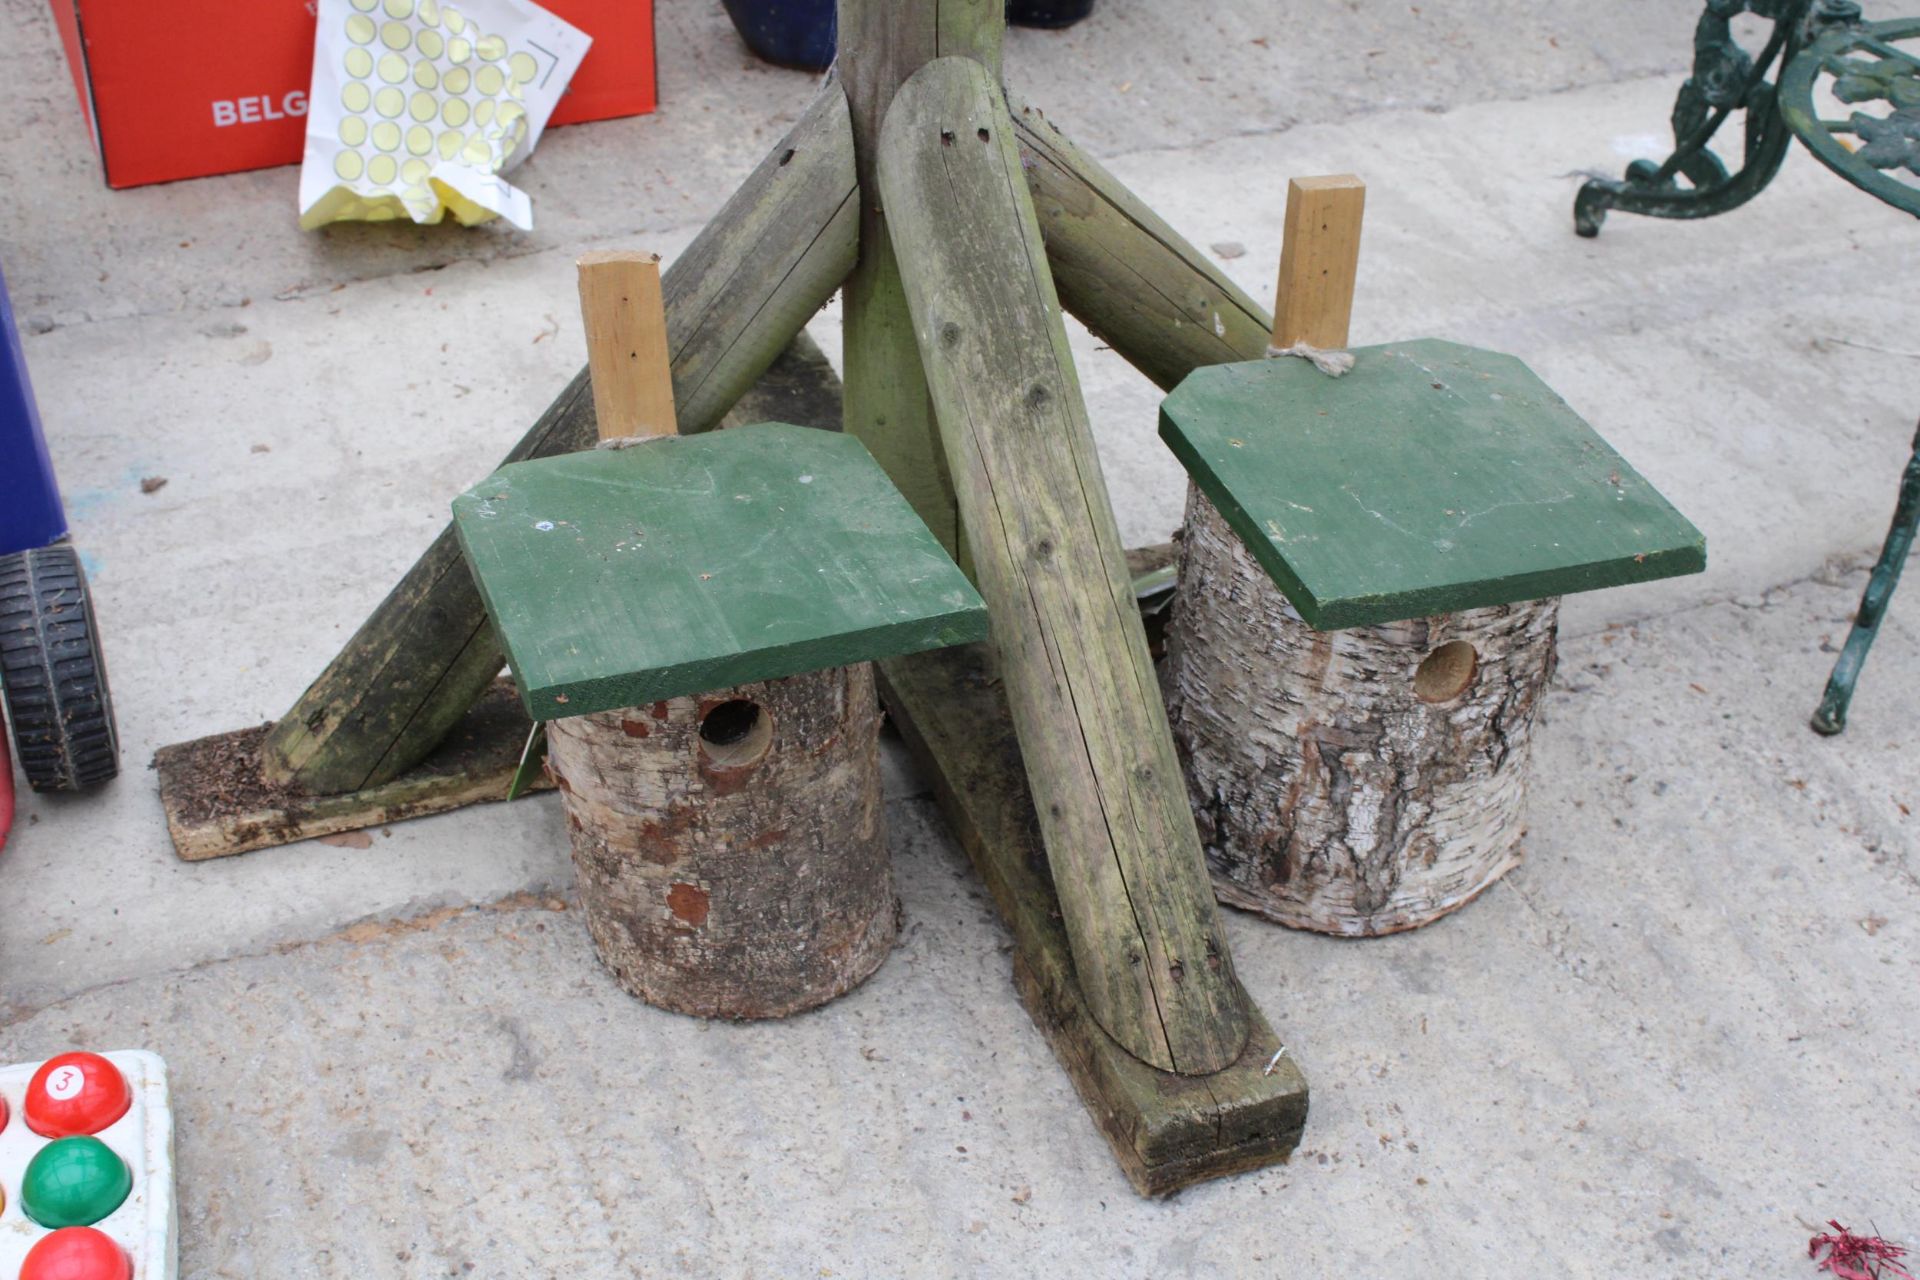 A WOODEN BIRD TABLE AND TWO LOG BIRD BOXES - Image 3 of 3